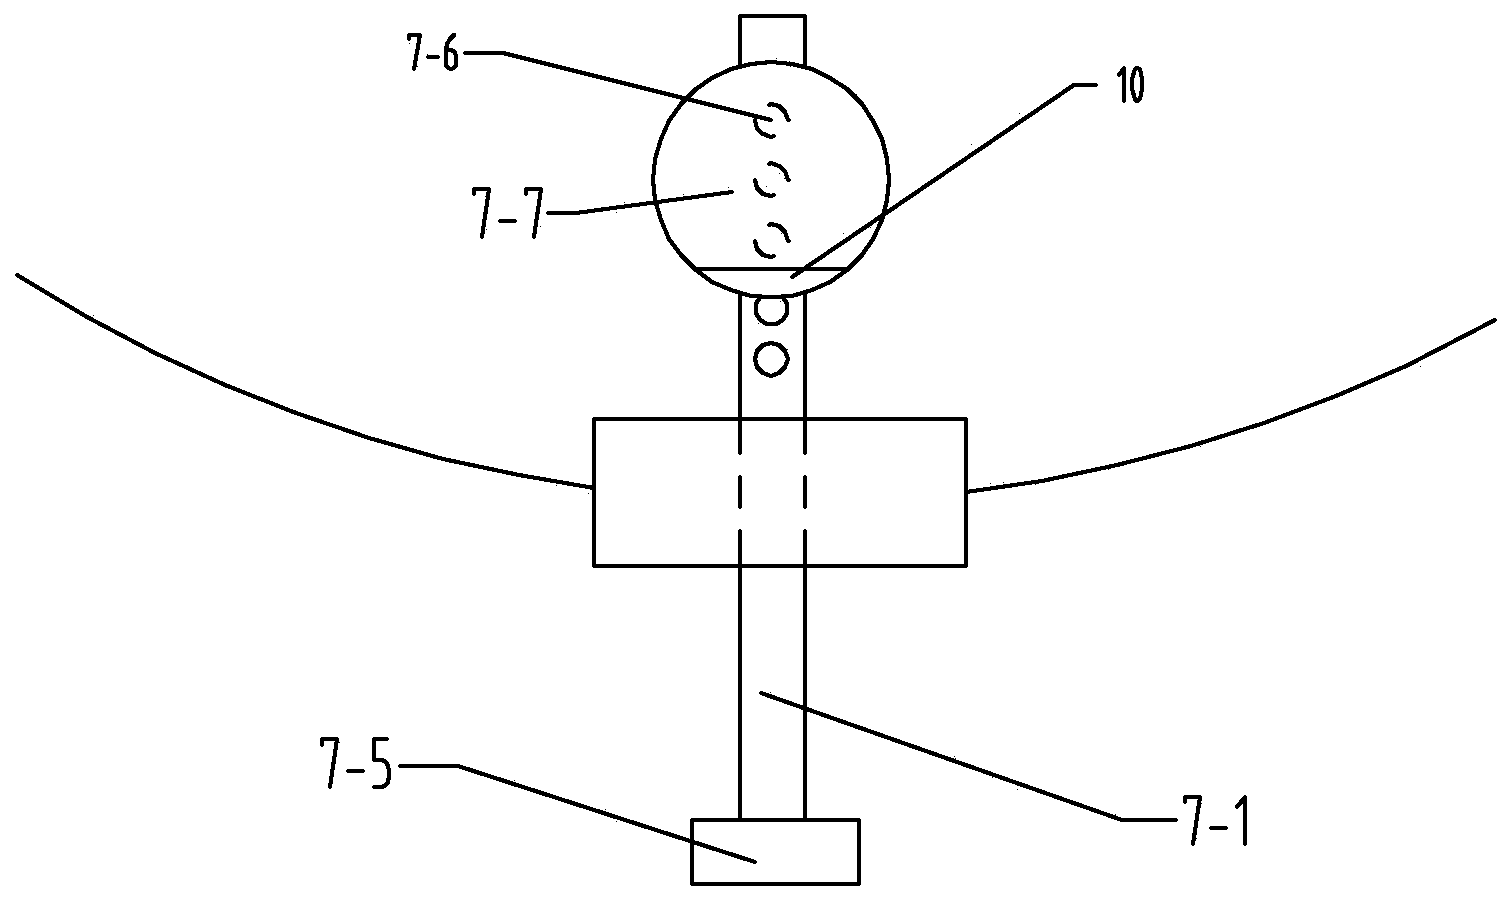 Laser type discus core stability and strength training and motion information feedback monitoring device